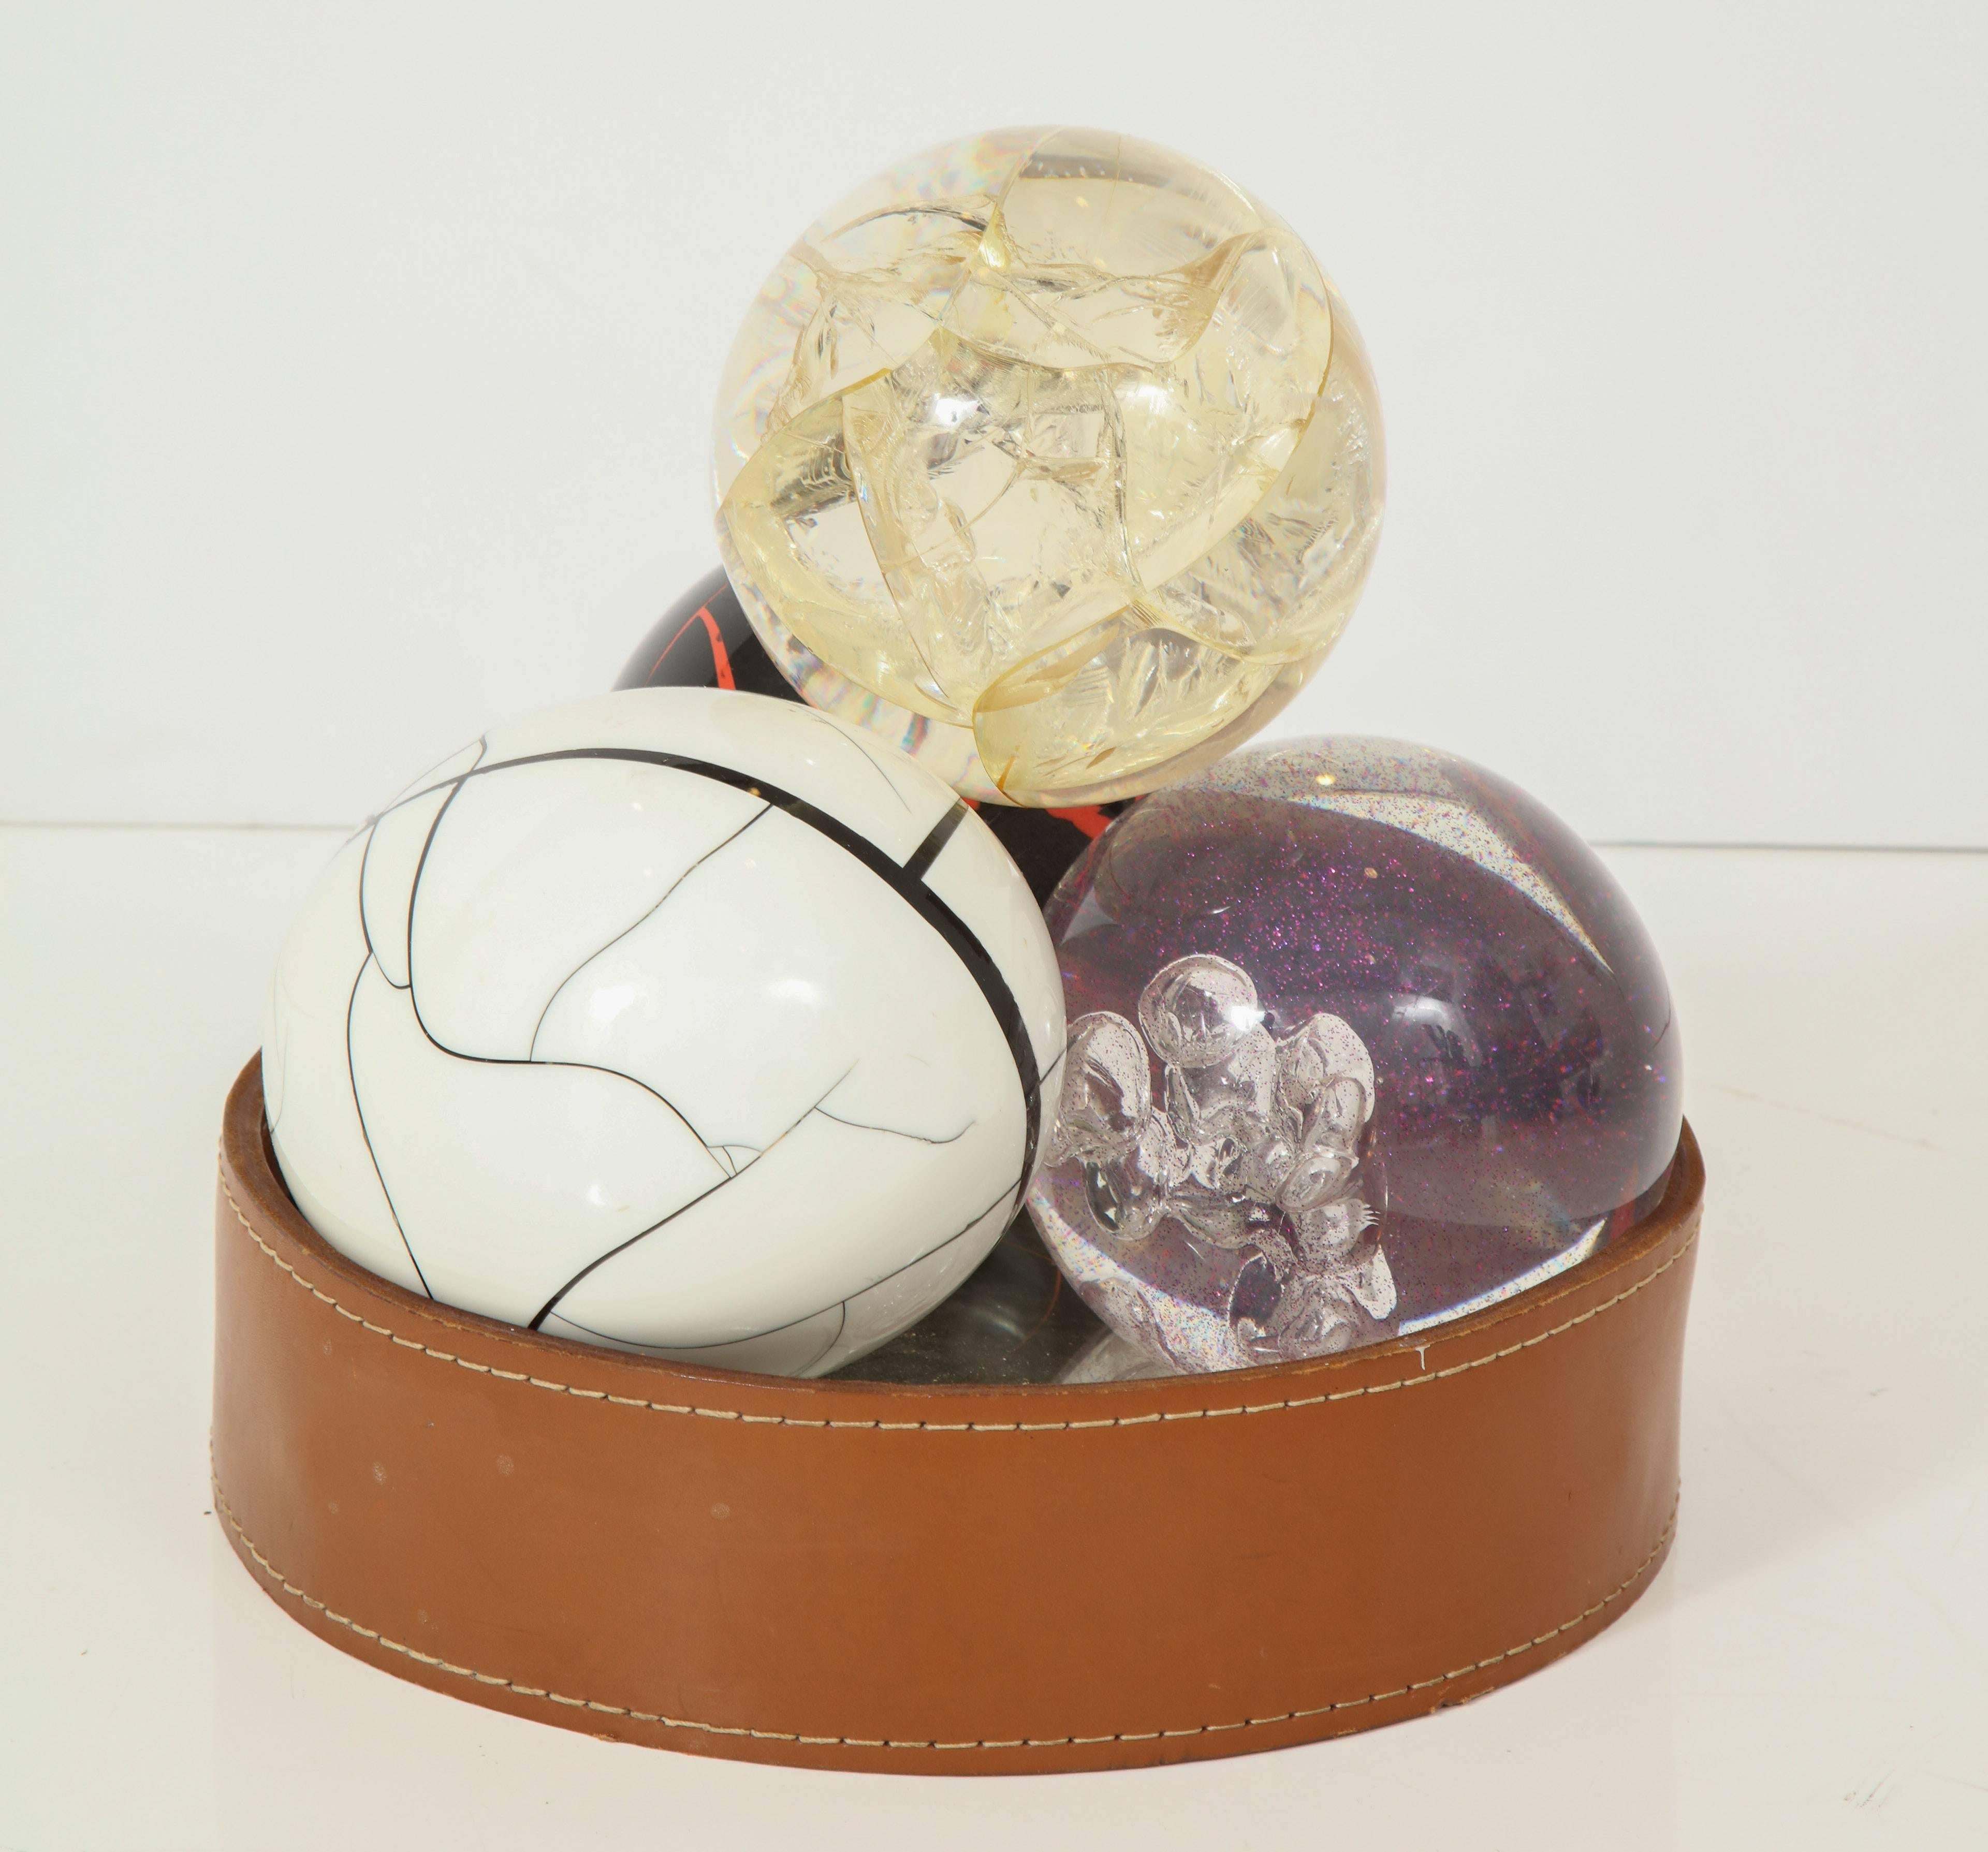 Four fractal resin objects by Marie Claude de fouquieres. $950 each
Measures: Spheres are 6'
eggs 8